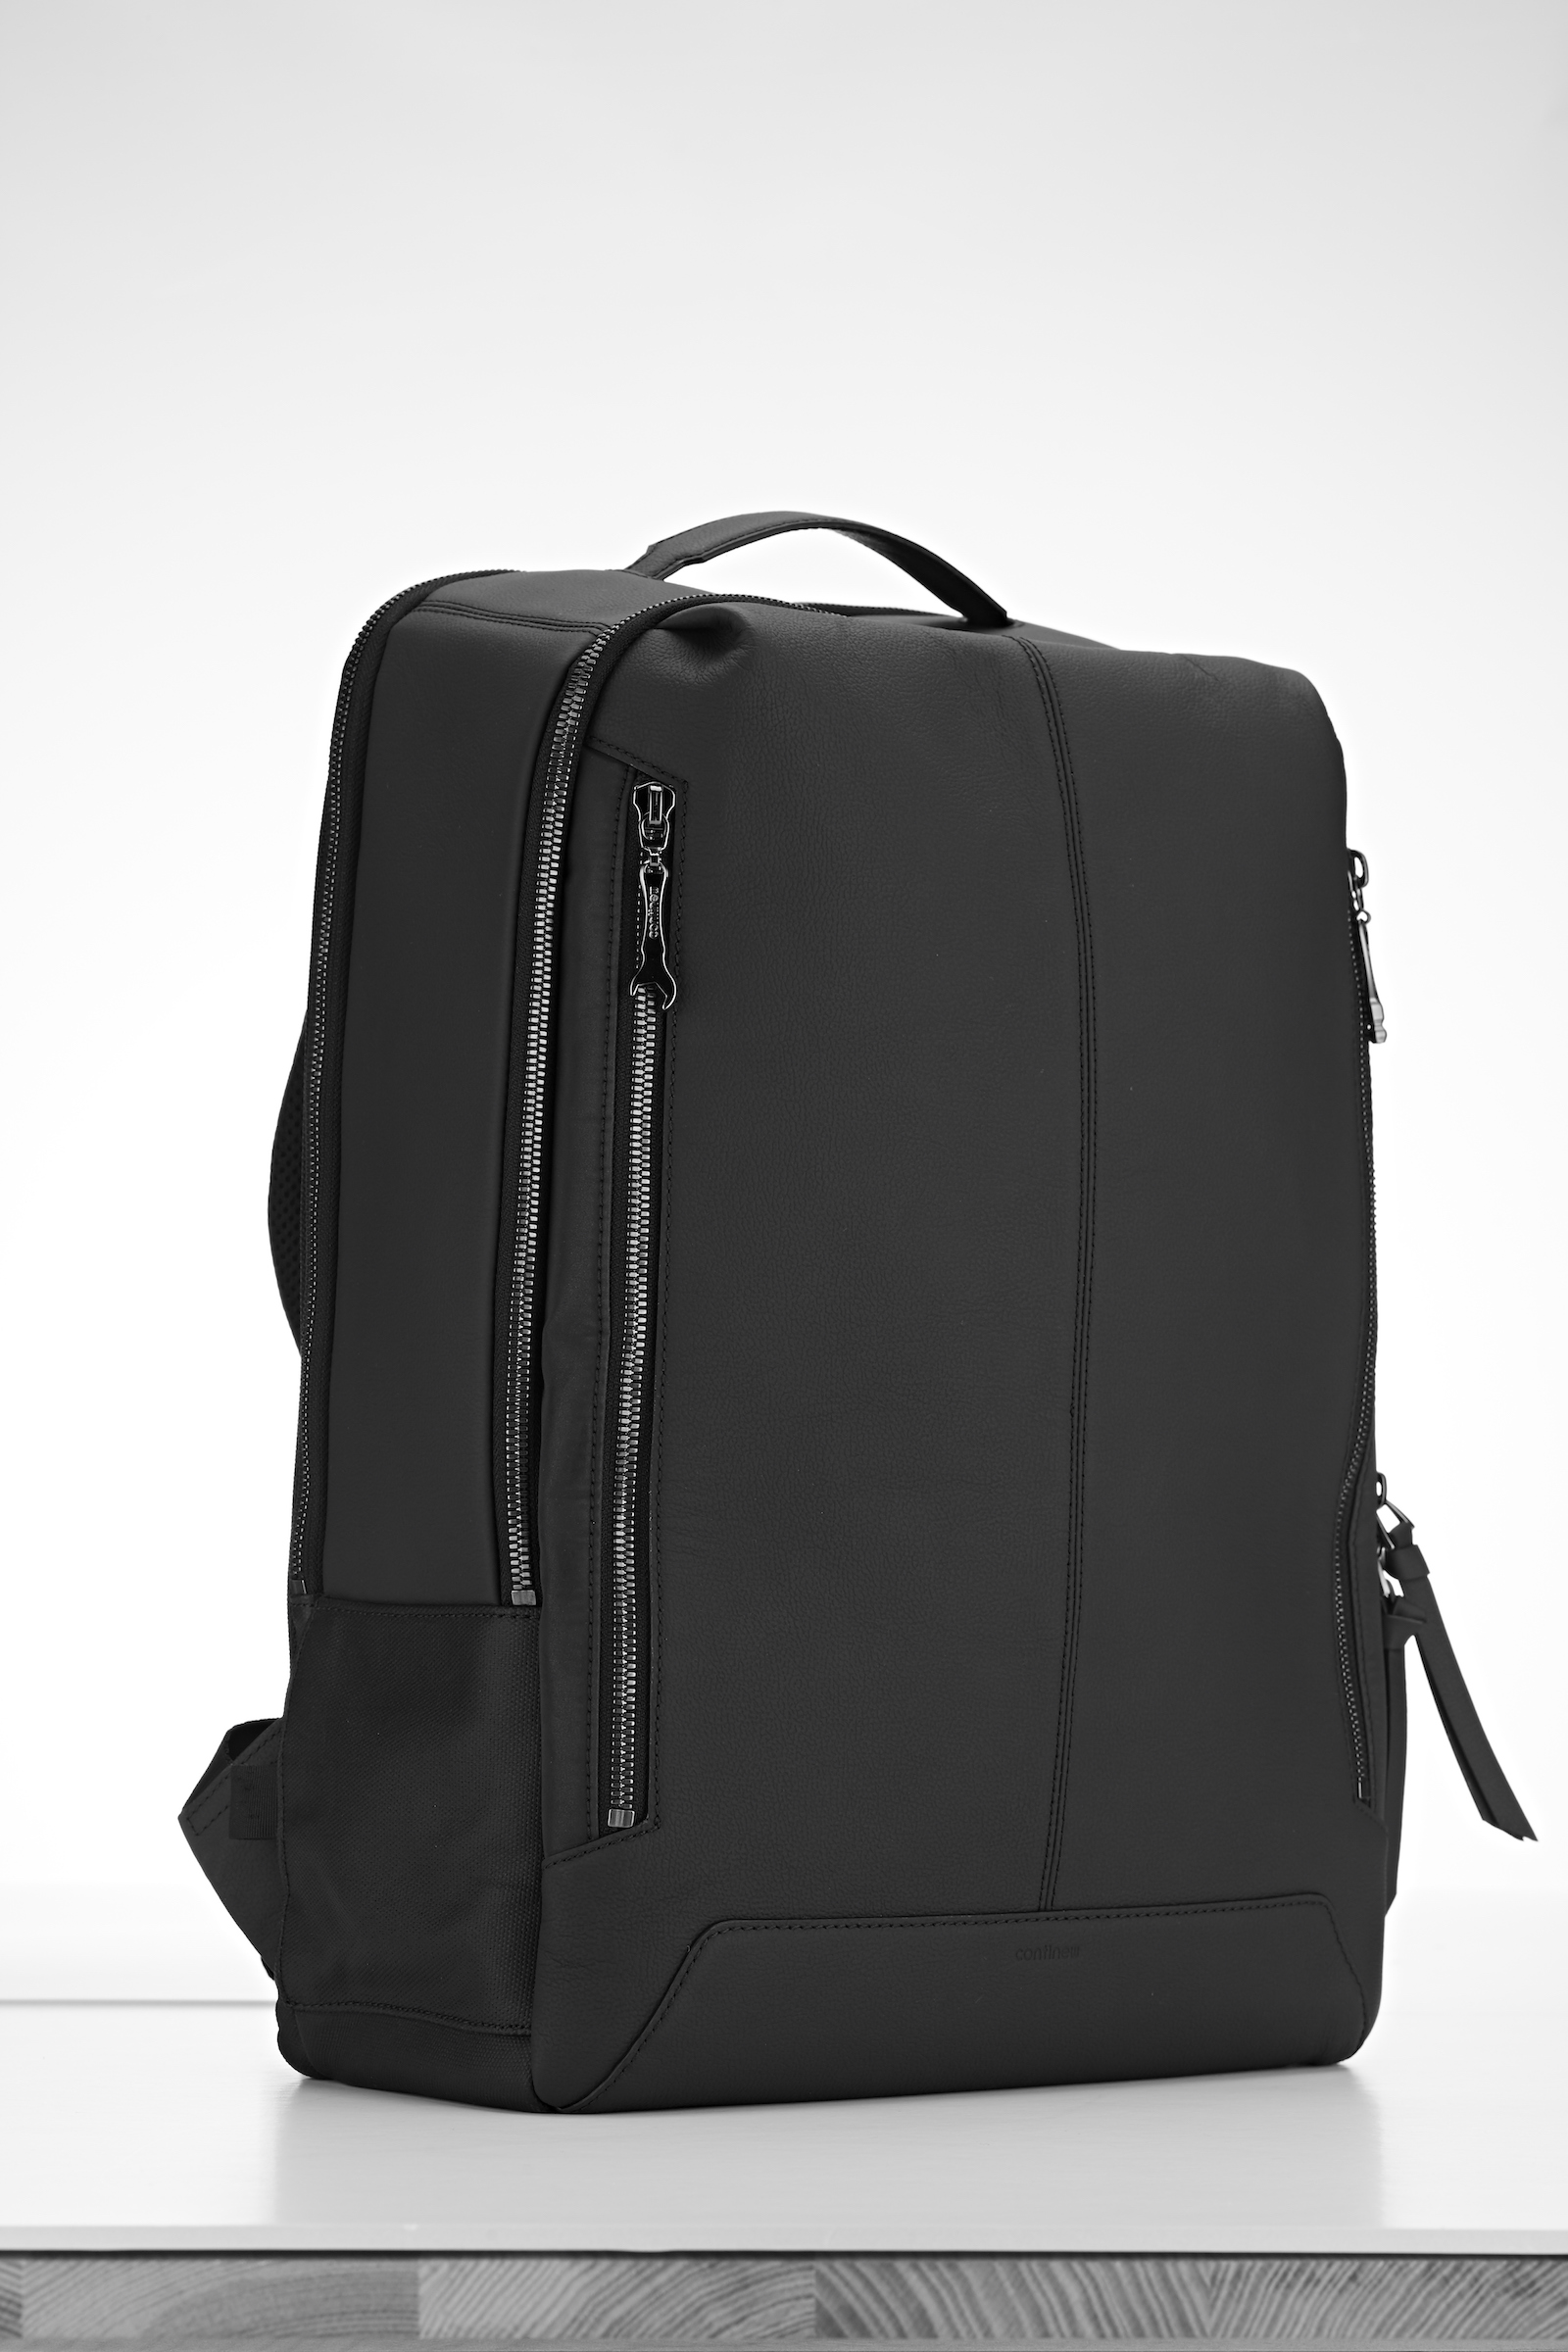 Continew Labs Unveils High-Quality Backpacks Made From Cars, Now ...